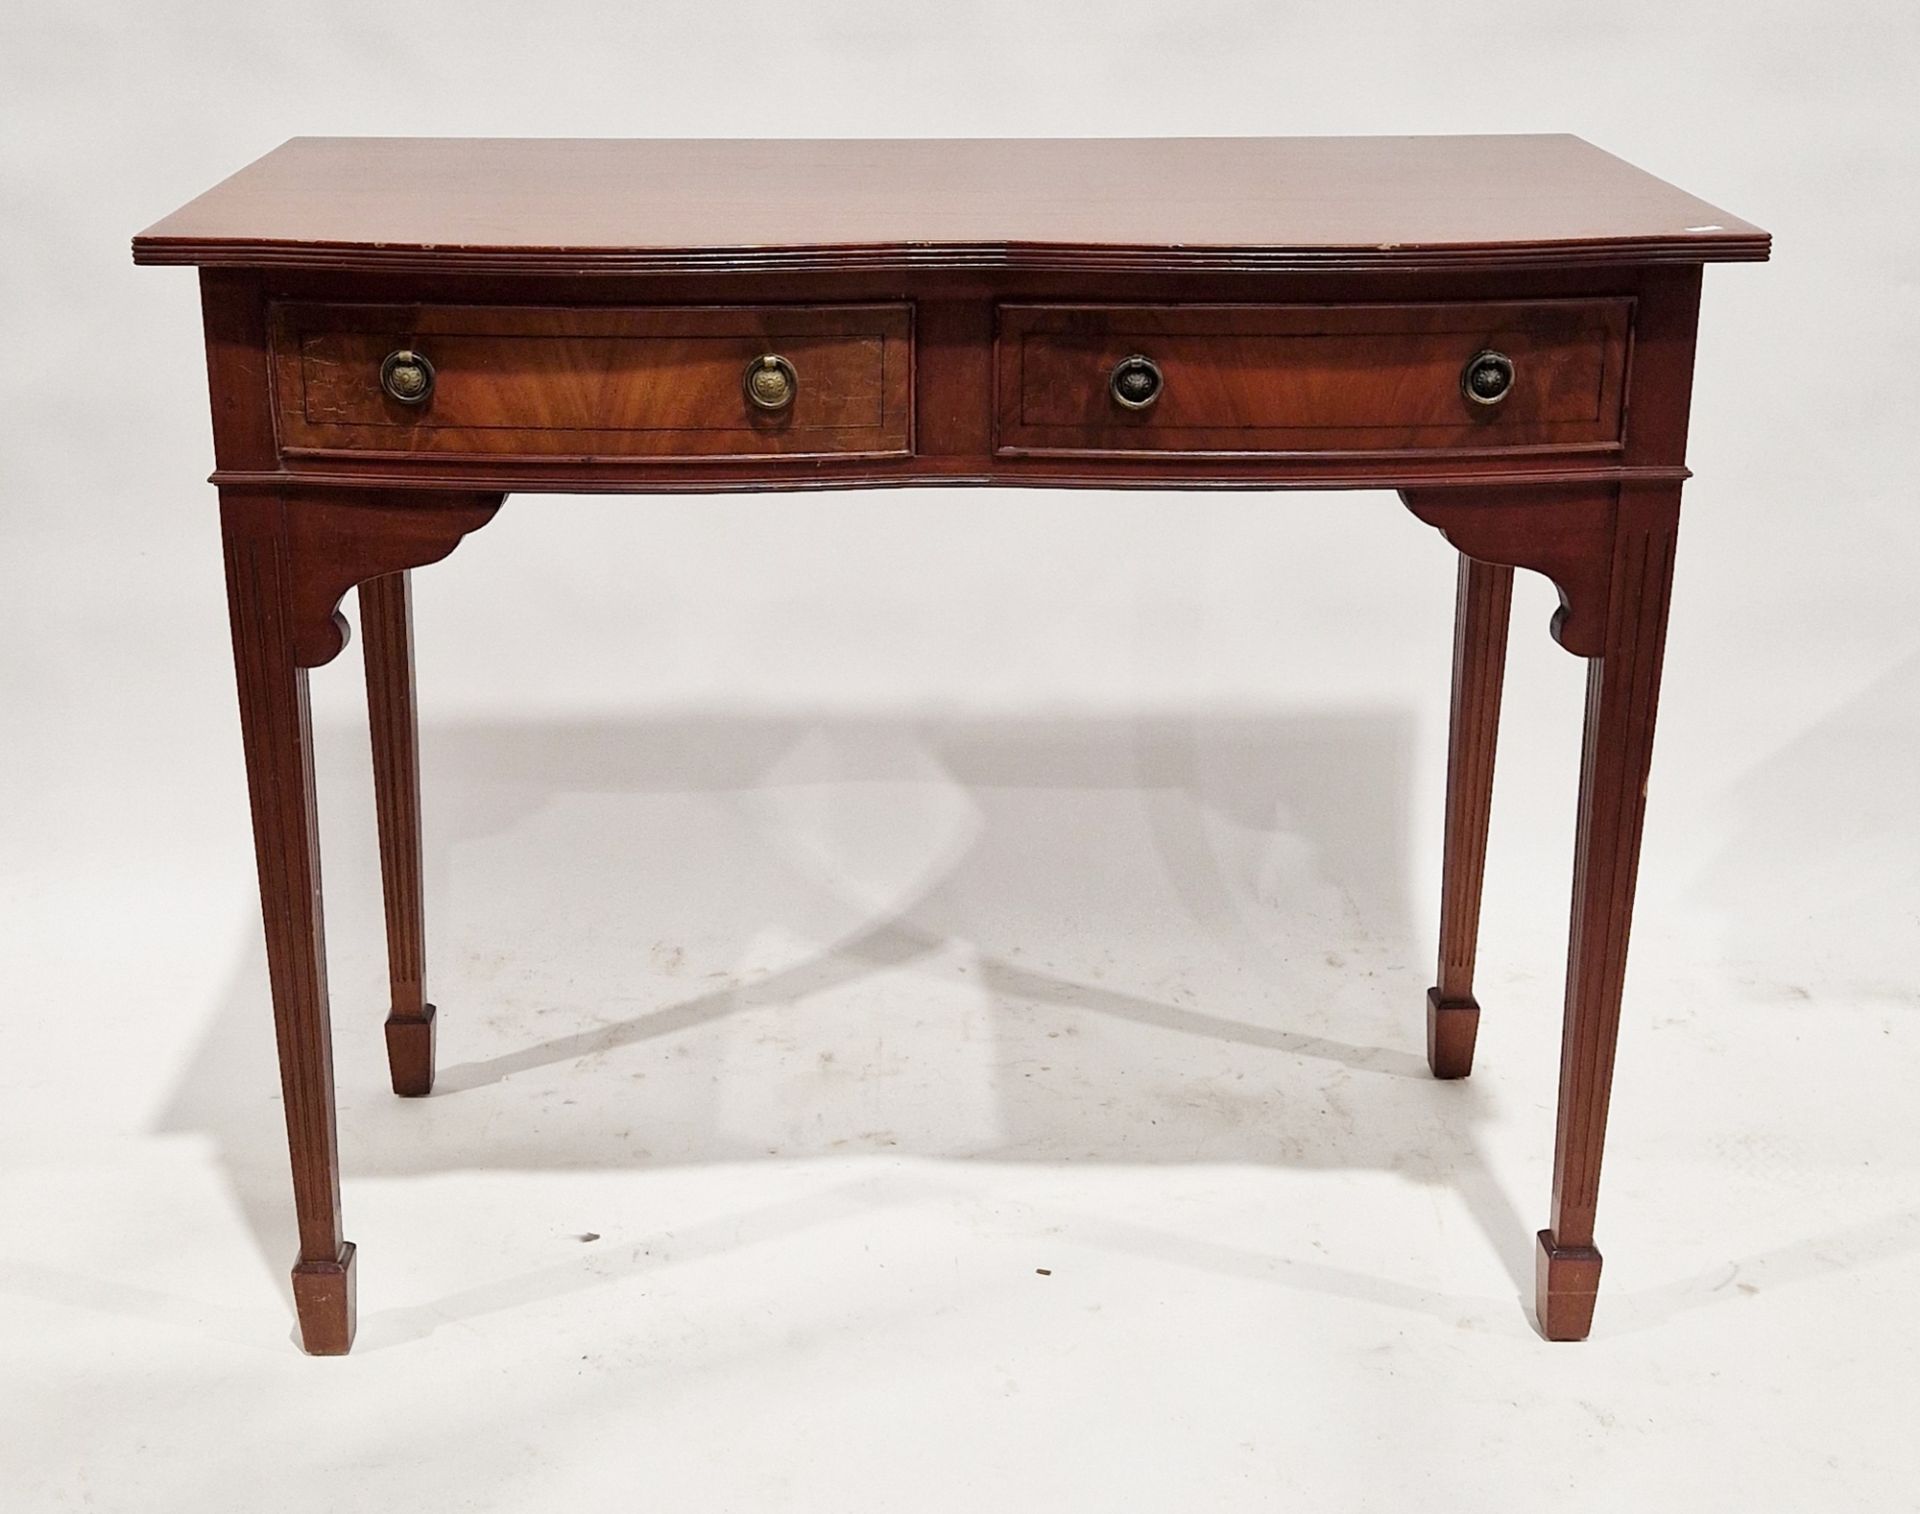 20th century mahogany serpentine fronted console table with two short drawers to the front, on